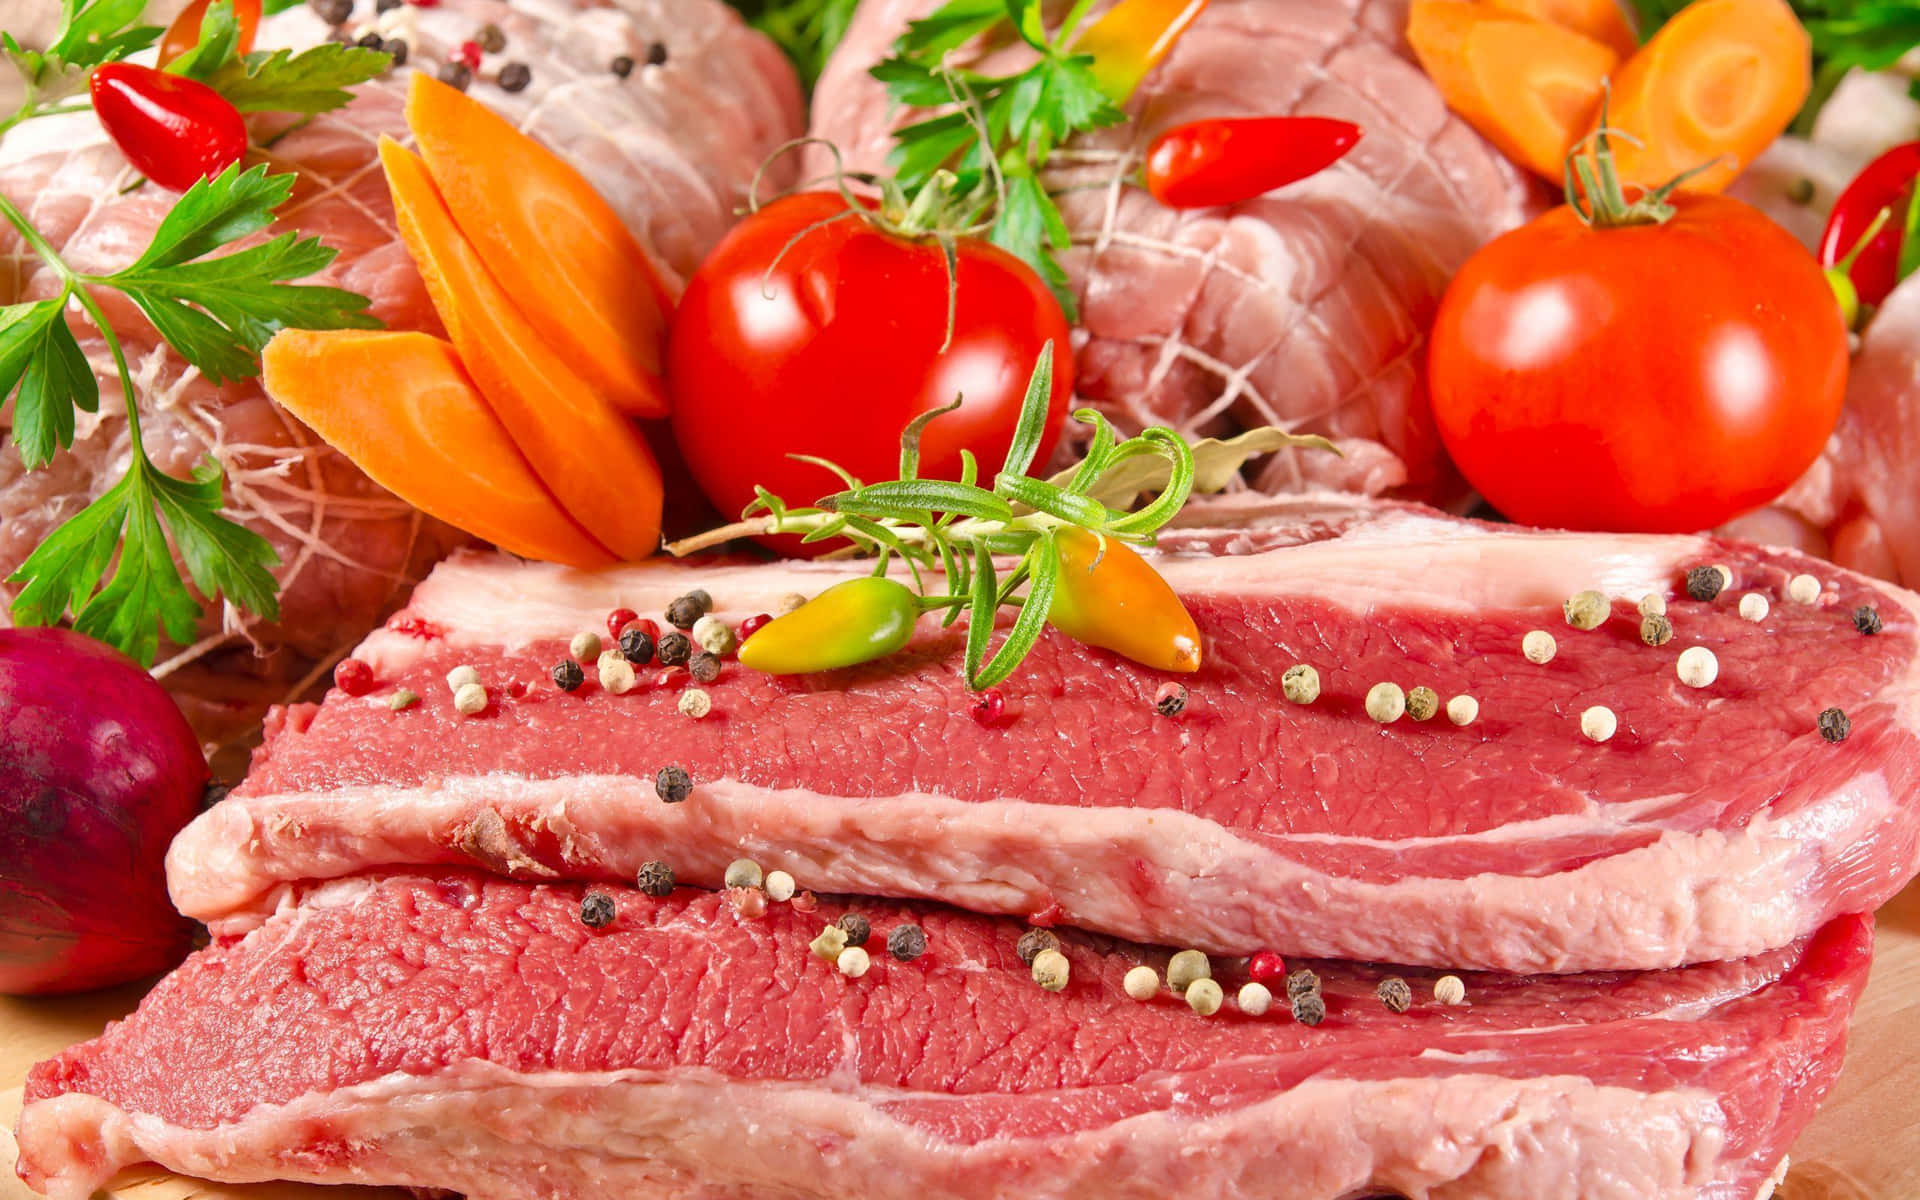 Enjoy a delicious spread of fresh, succulent meat.